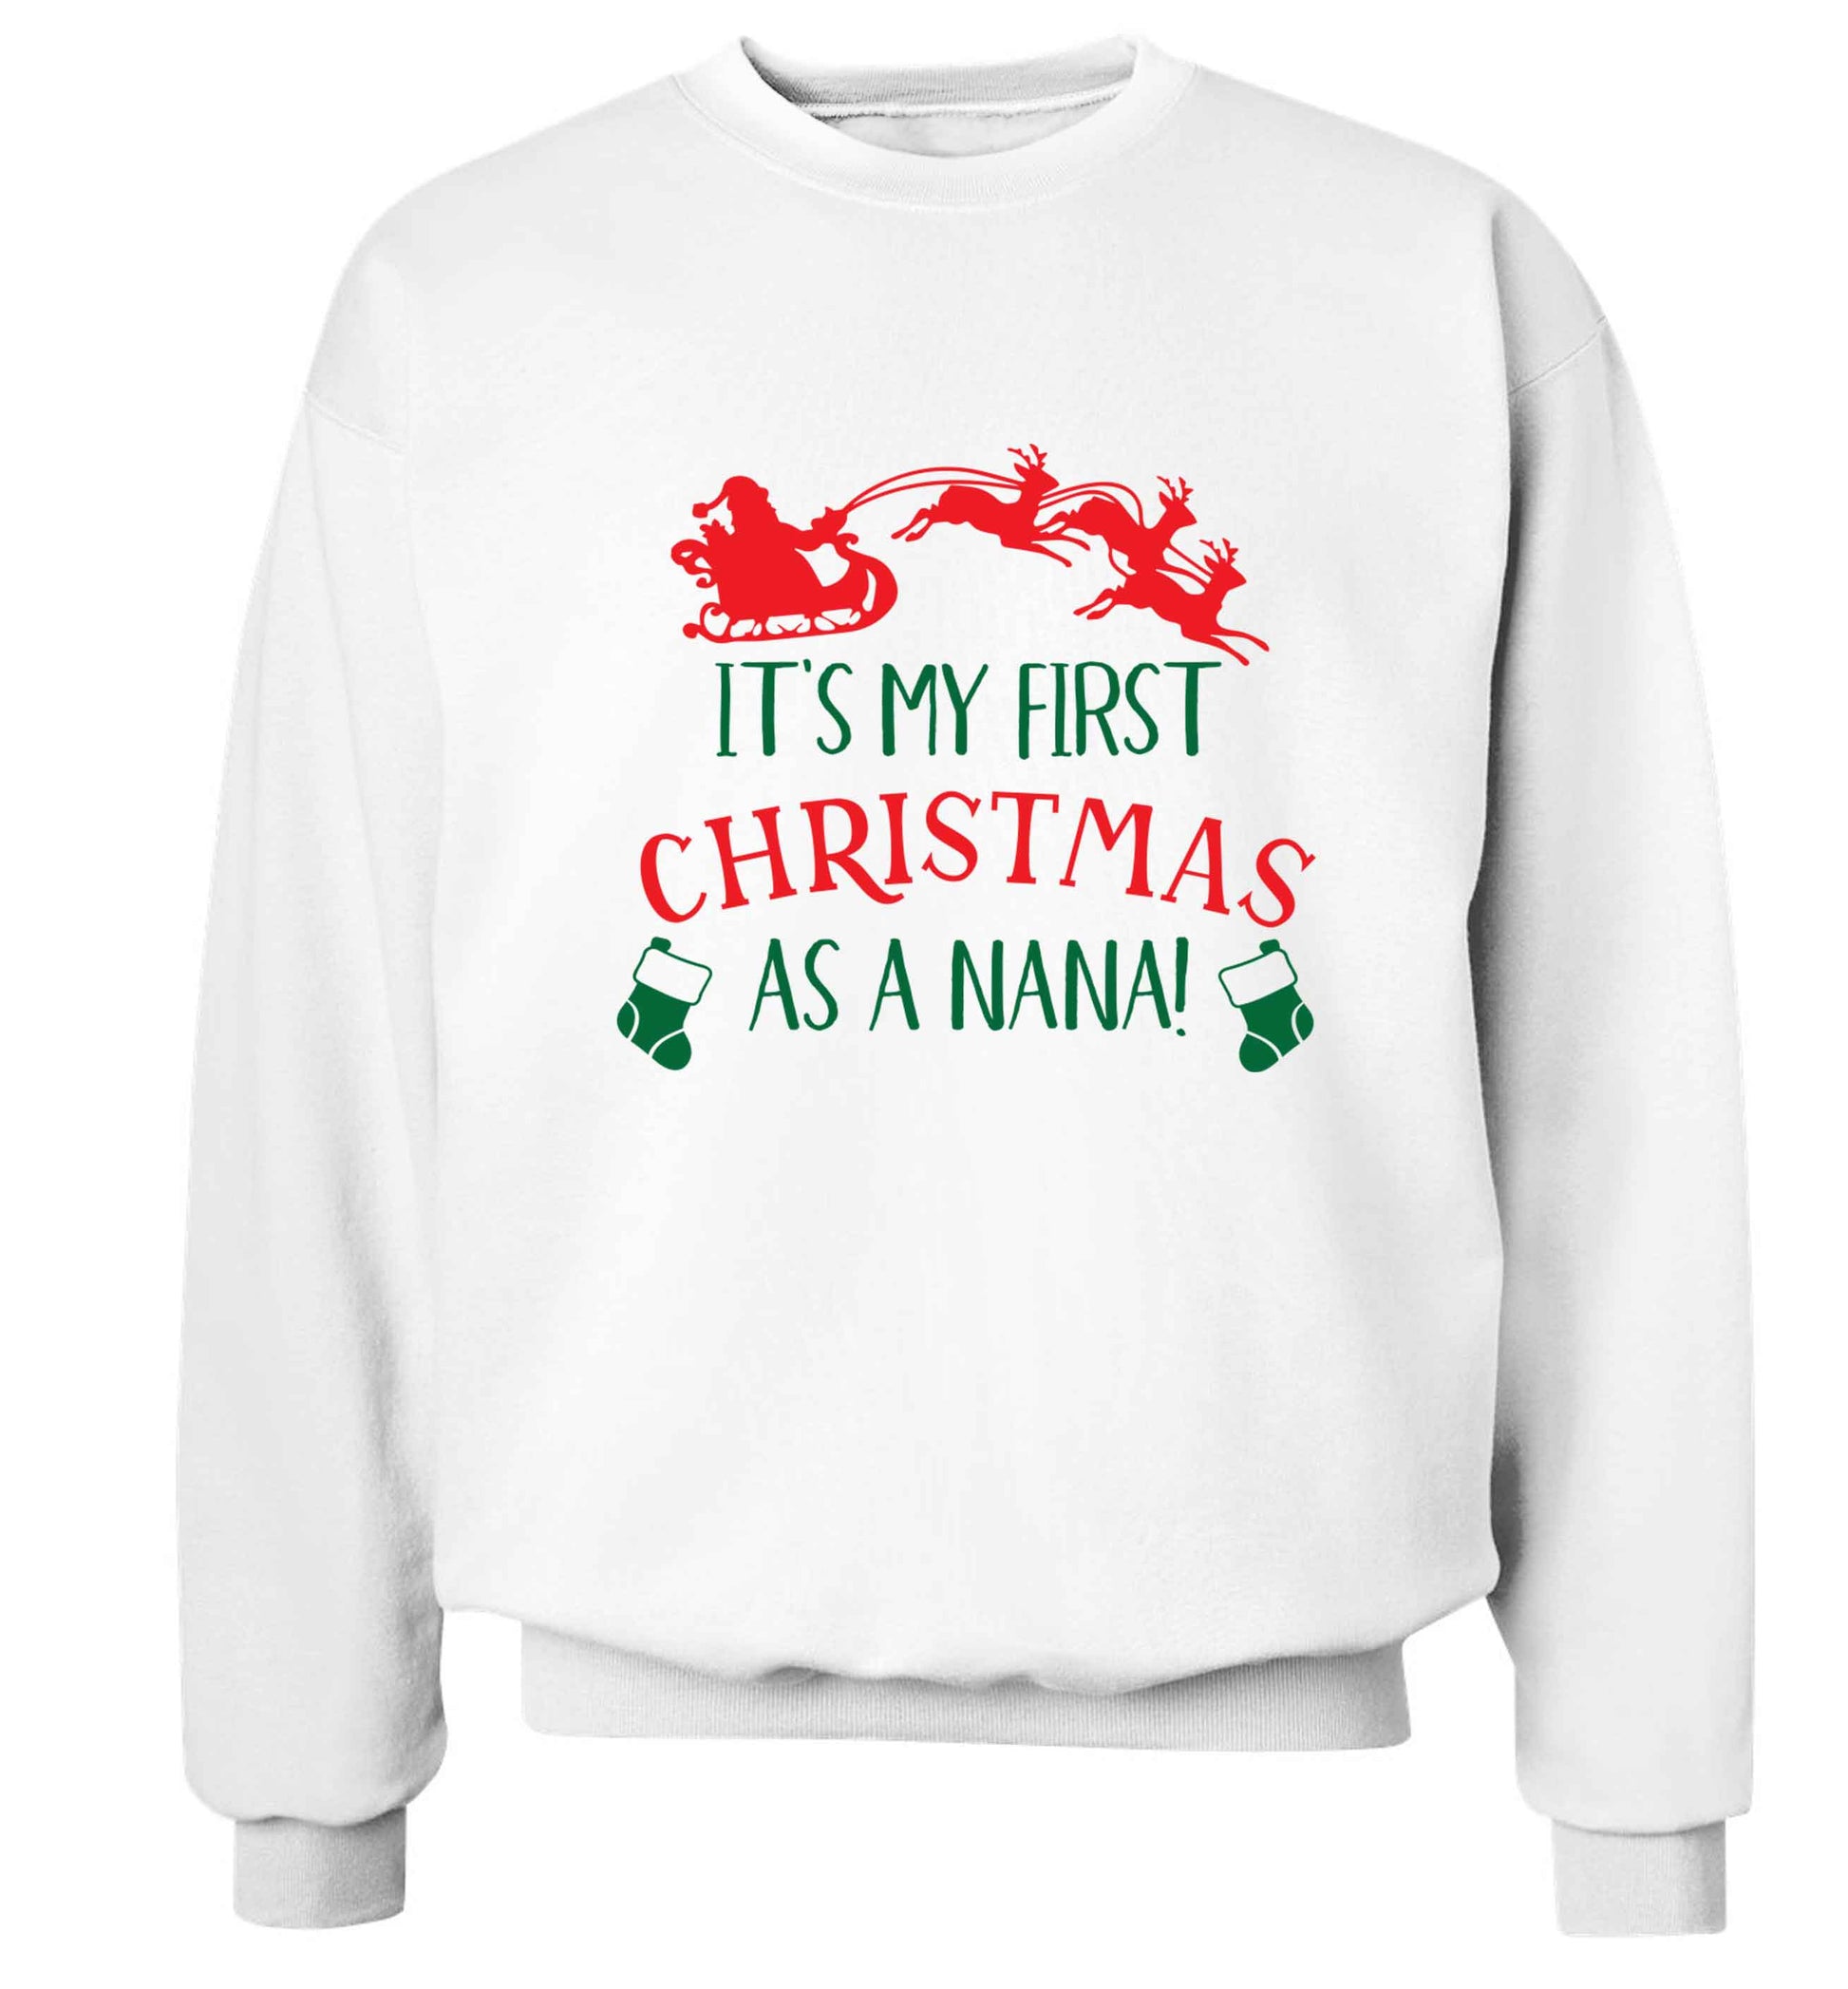 It's my first Christmas as a nana Adult's unisex white Sweater 2XL